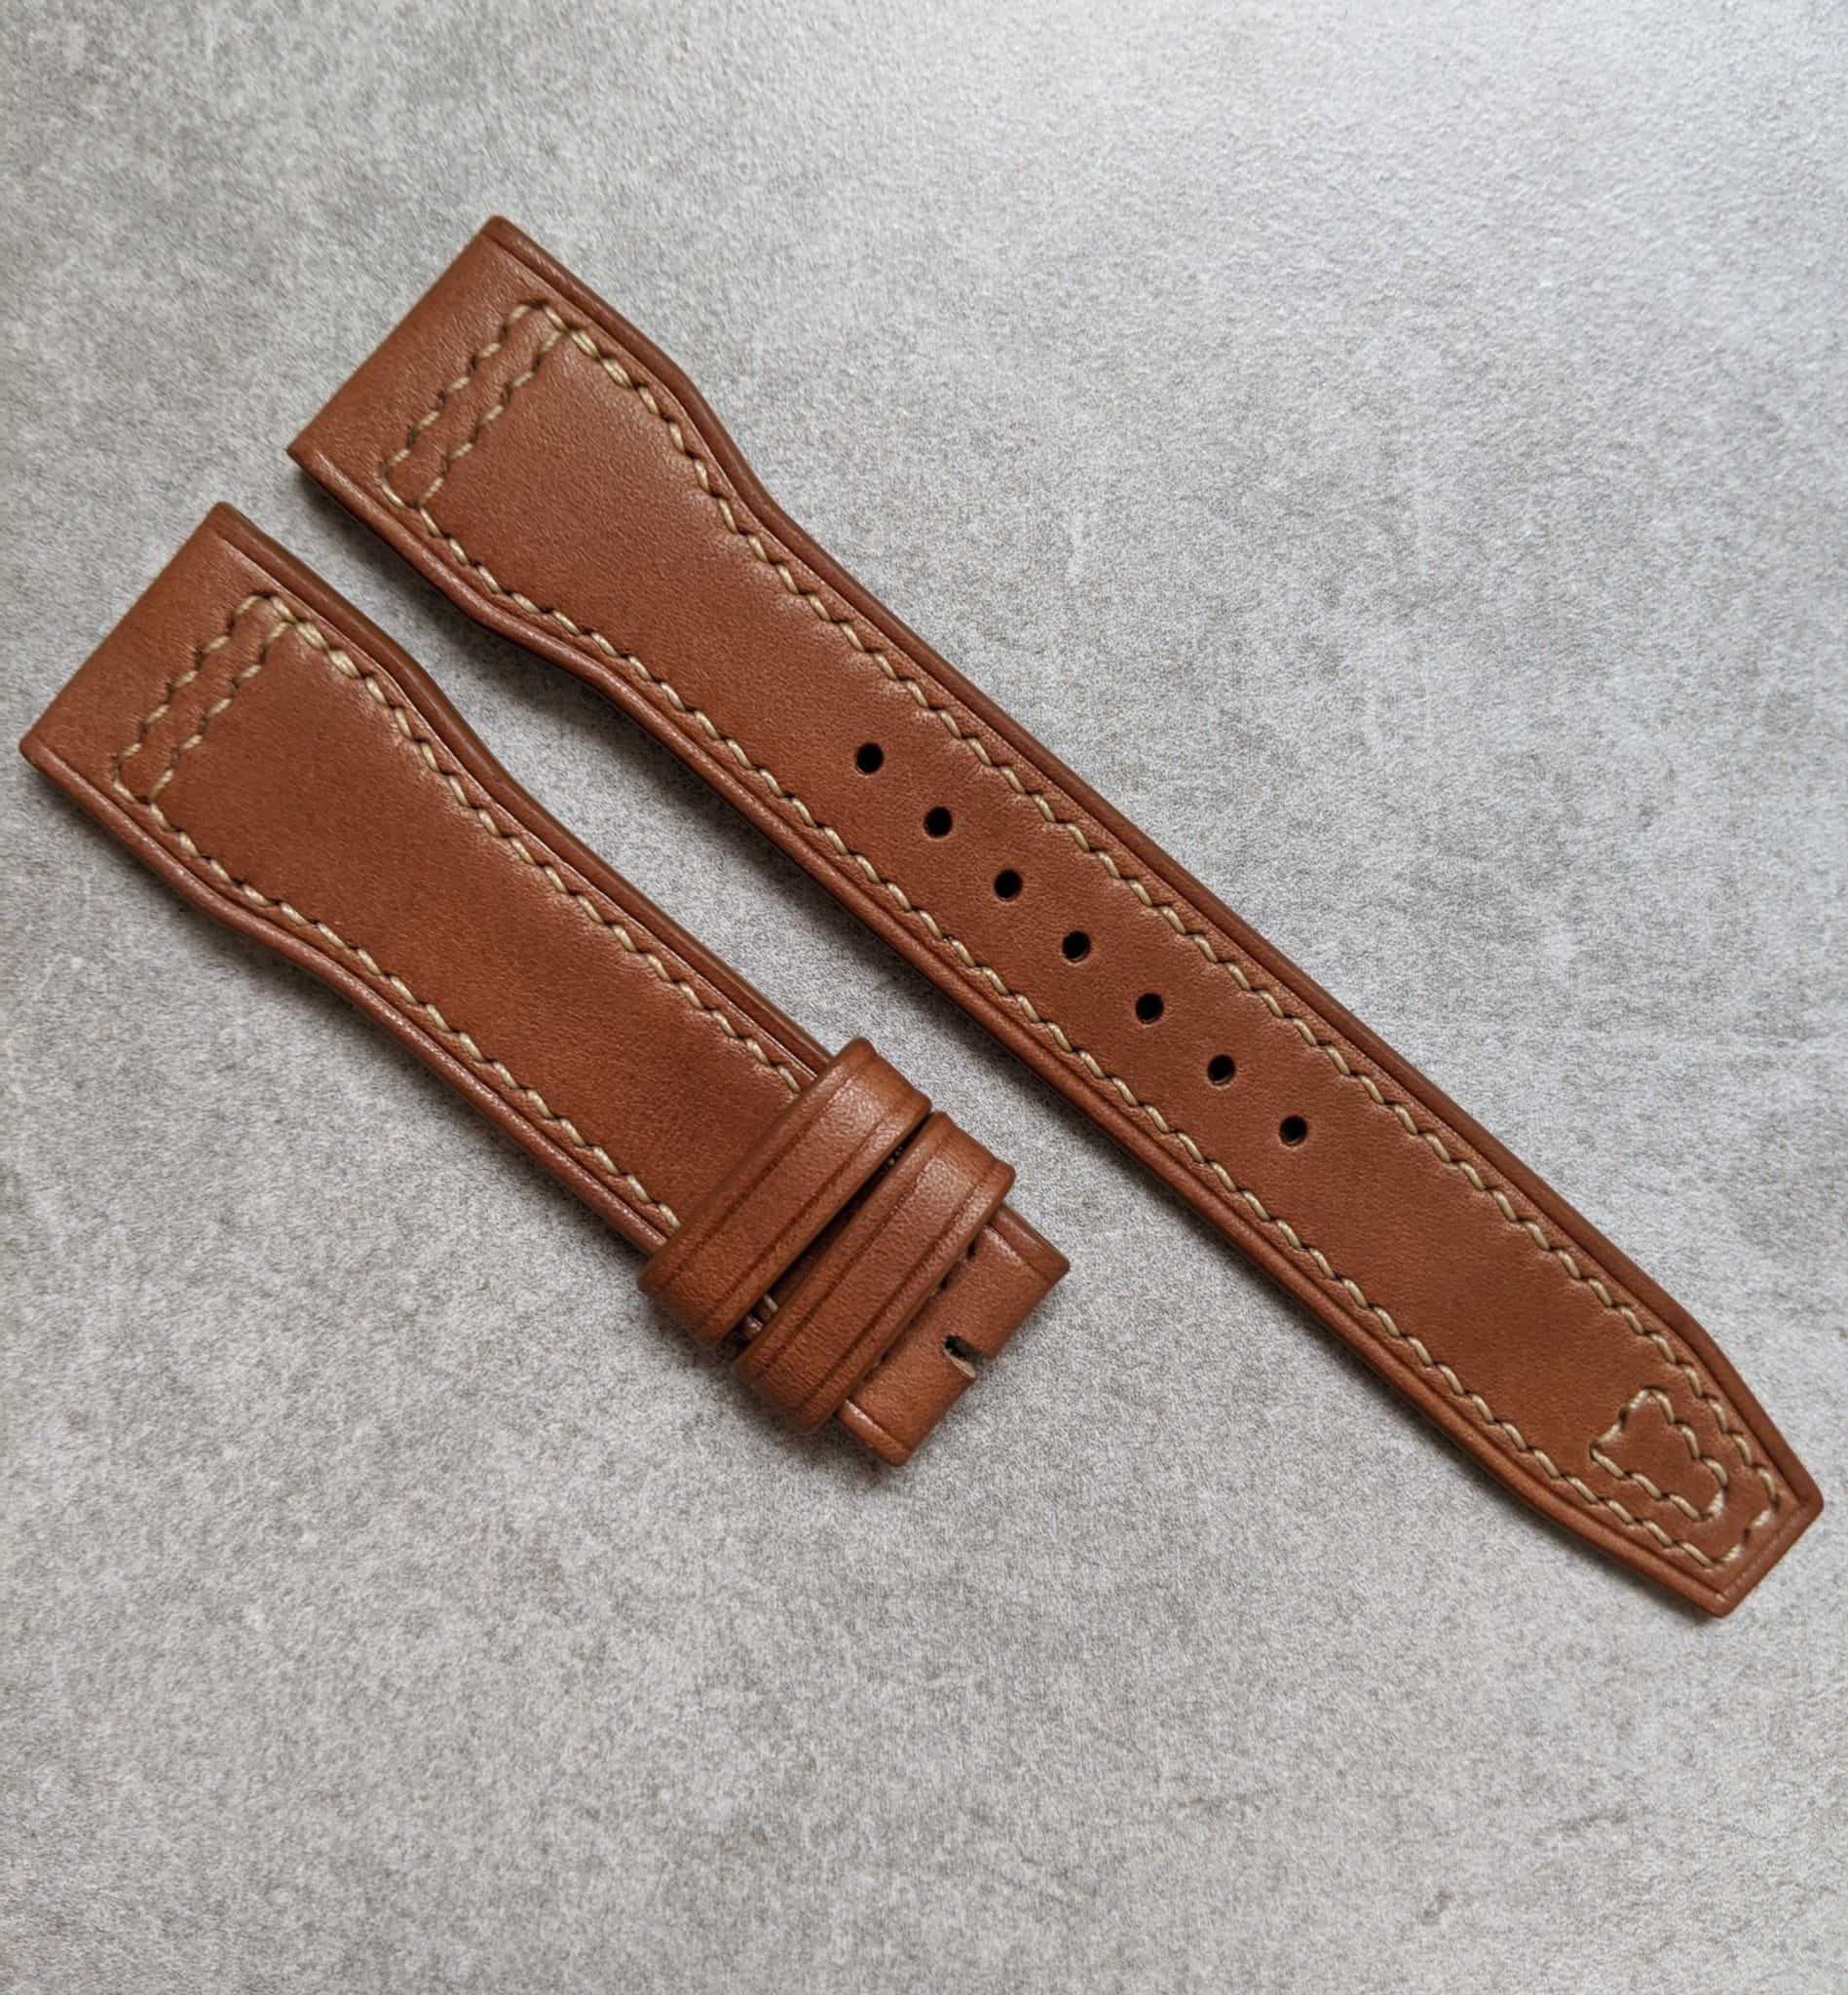 iwc-style-watch-strap-brown